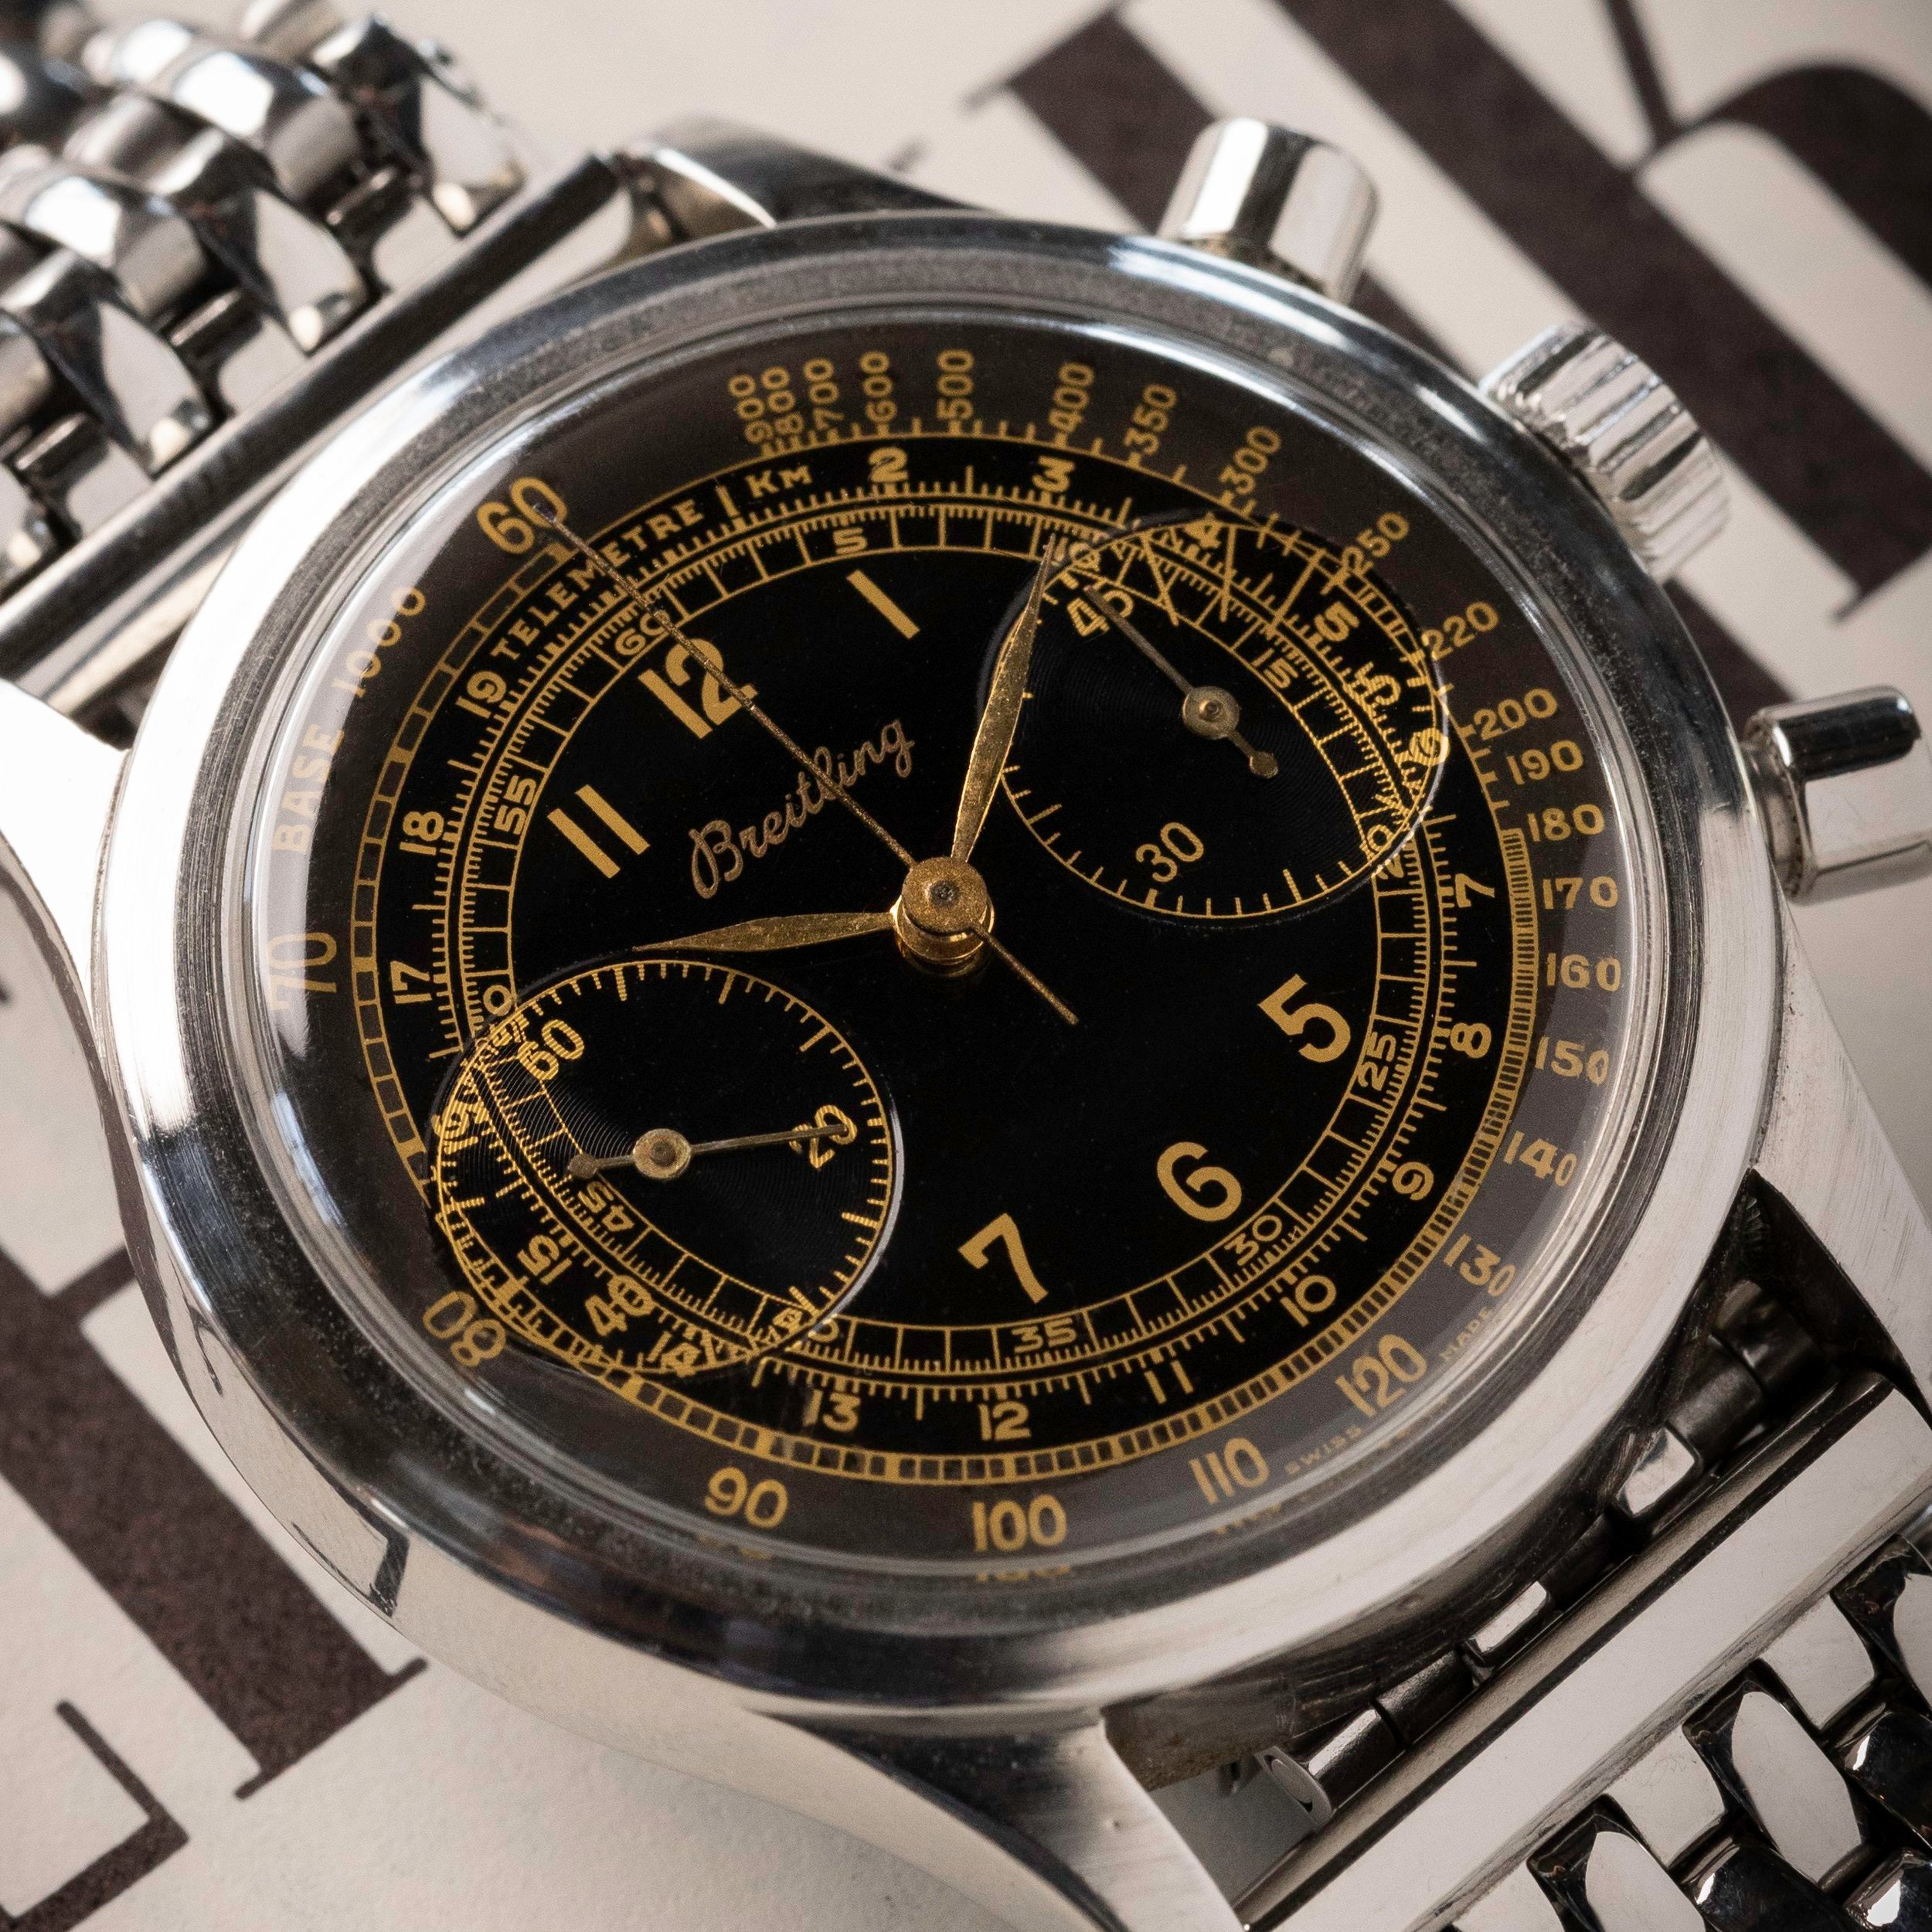 Breitling 'Clamshell' Case Chronograph